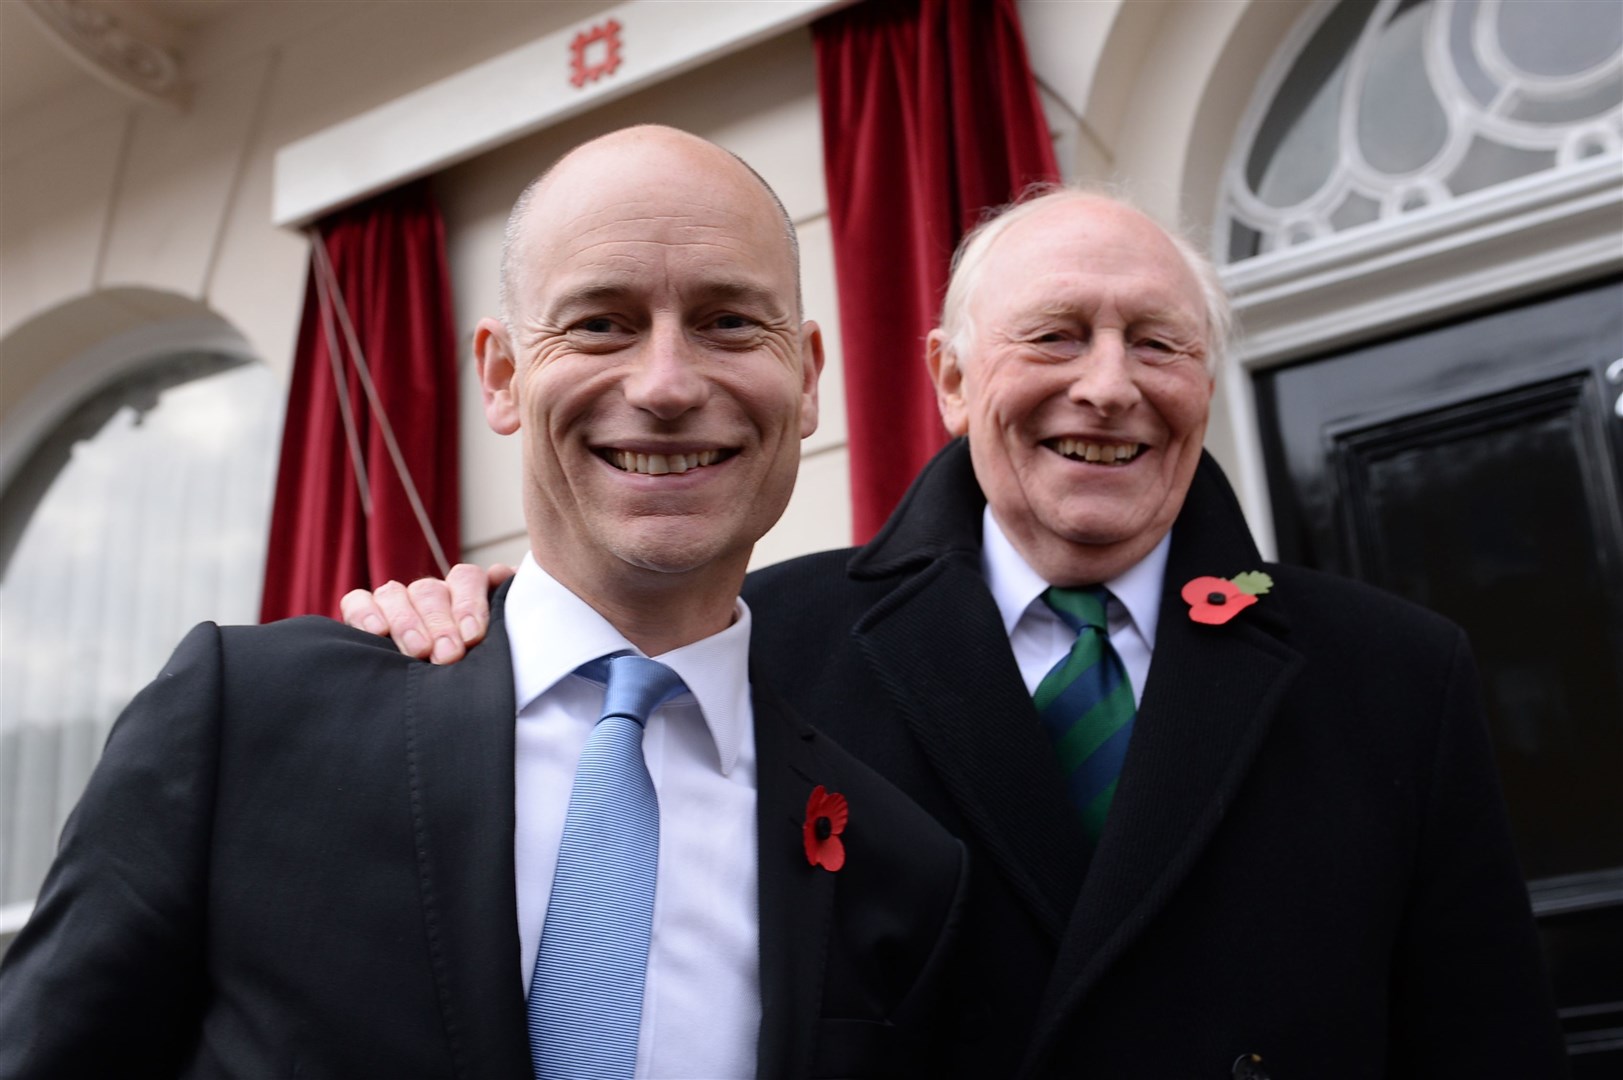 Former Labour leader Lord Kinnock poses for a photograph with his son Stephen Kinnock MP (Stefan Rousseau/PA)